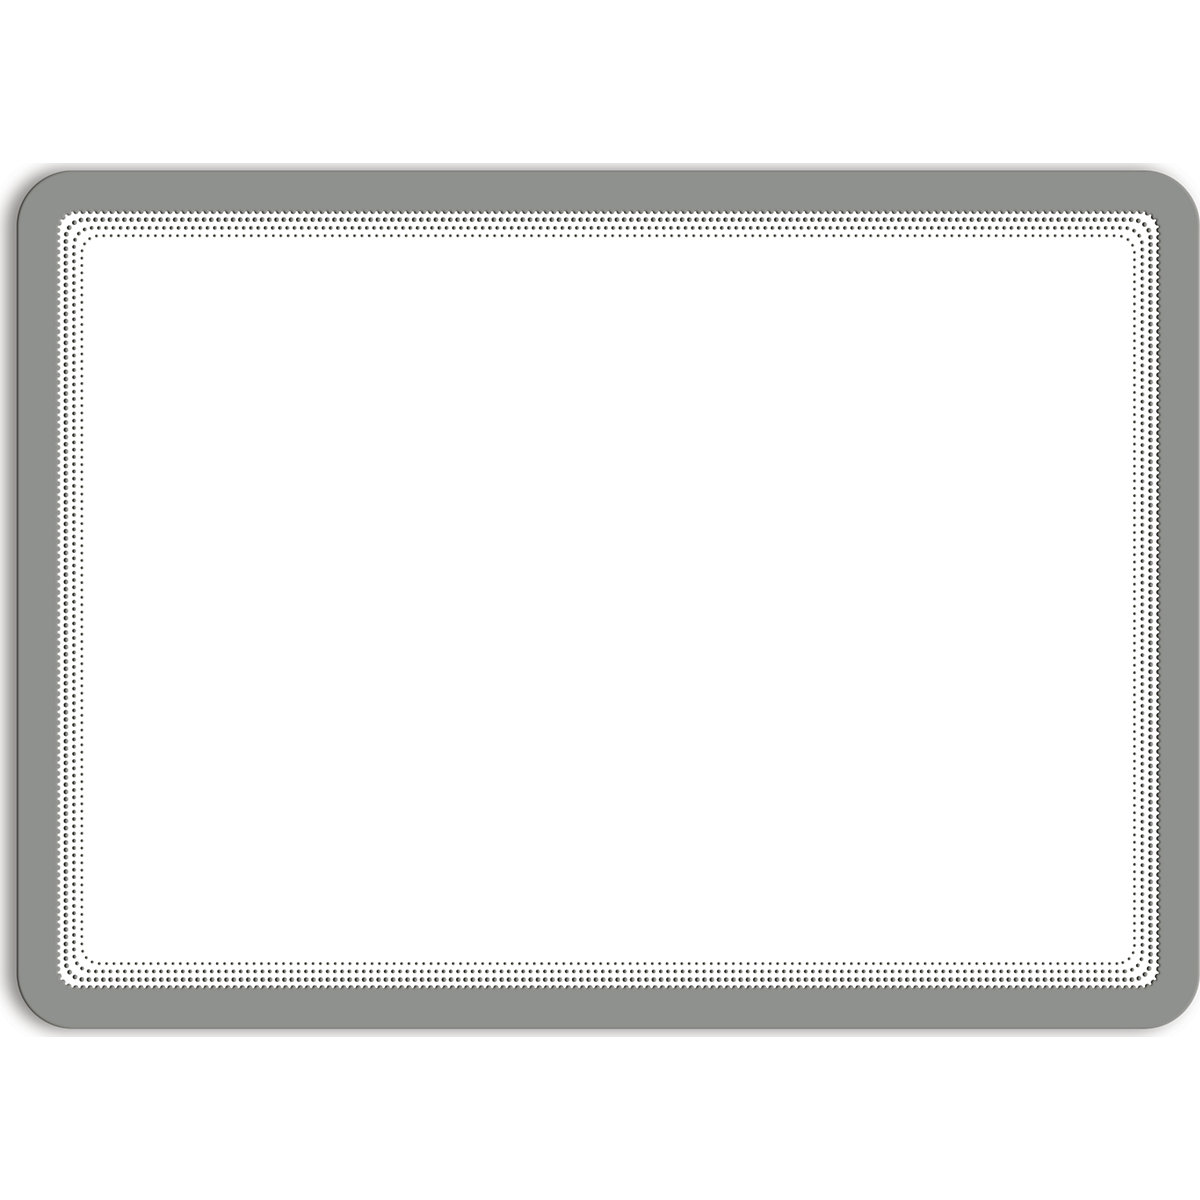 Transparent sleeve for documents, A4 – Tarifold, with magnetic latch, self adhesive, silver, pack of 2-7